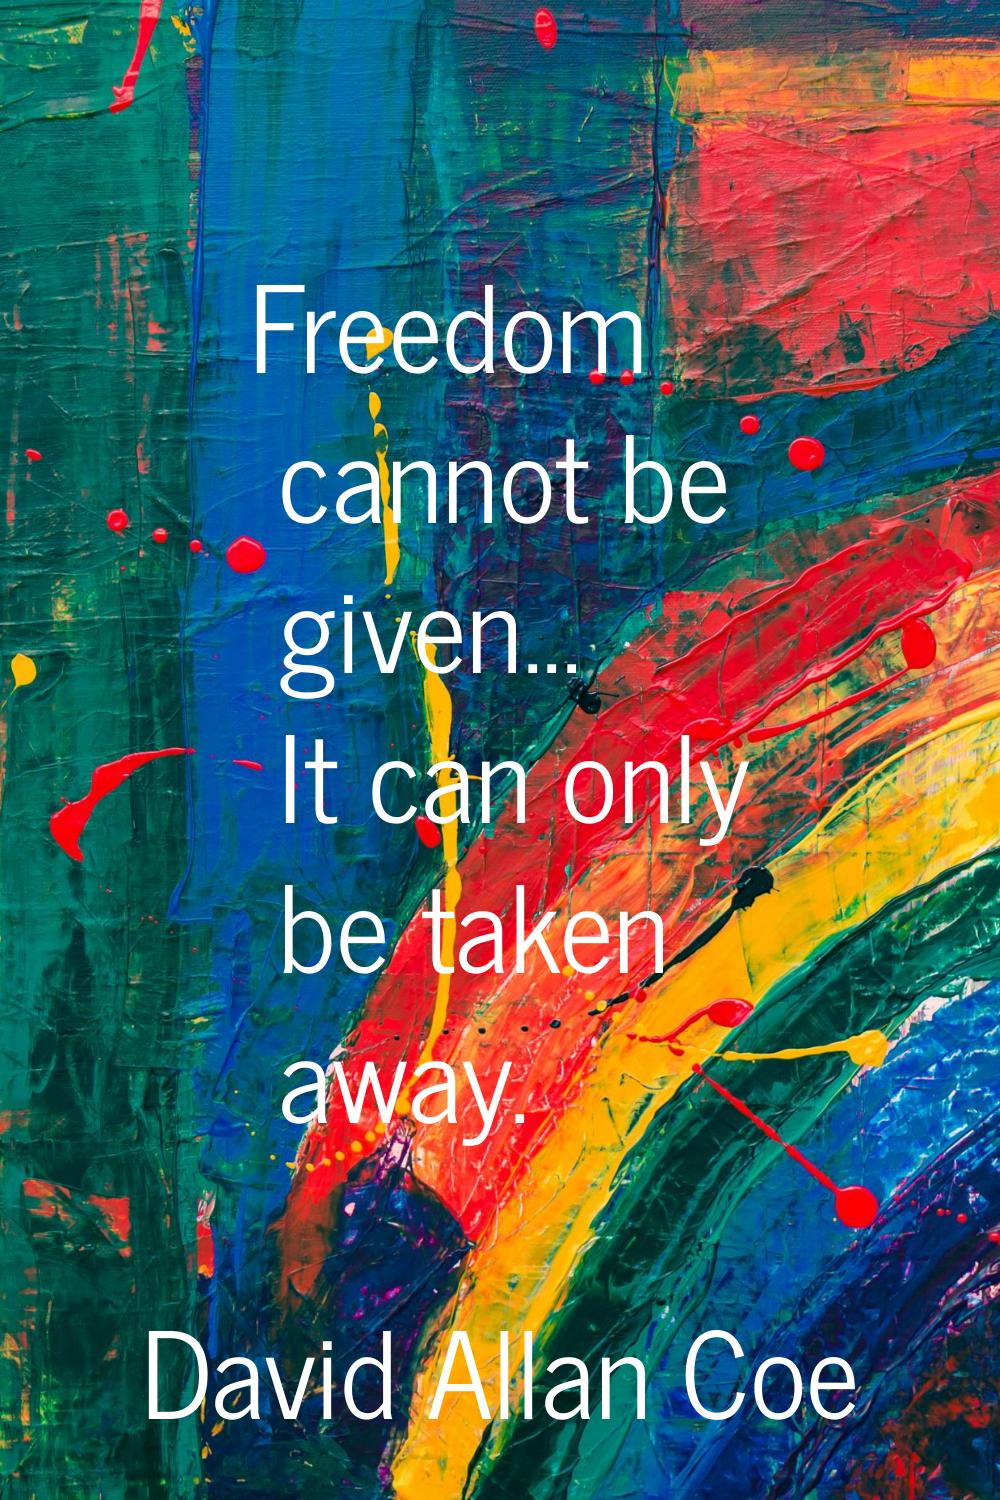 Freedom cannot be given... It can only be taken away.